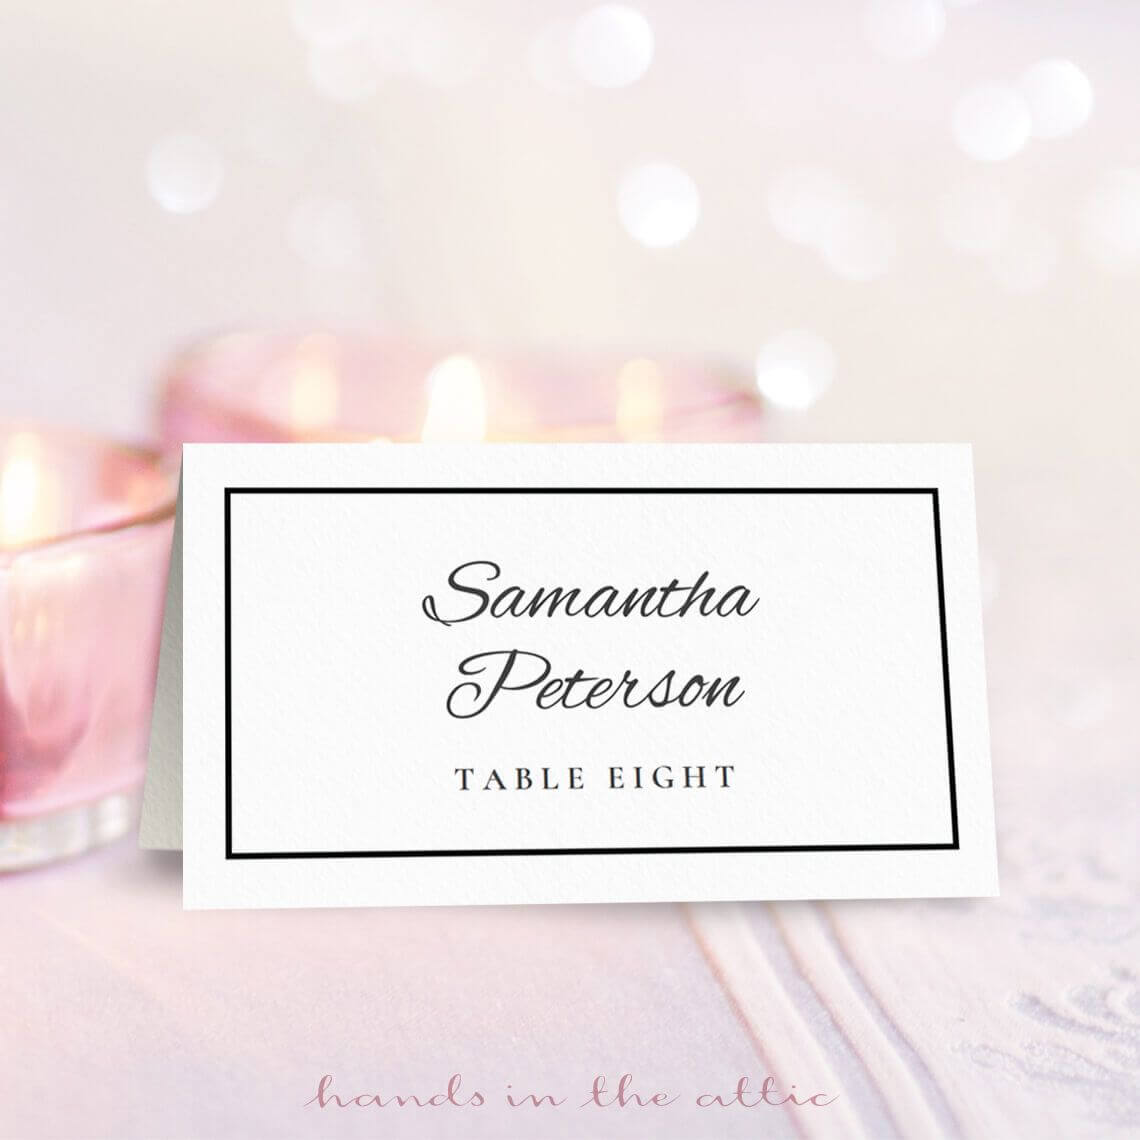 Wedding Place Card Template | Free Place Card Template Within Free Place Card Templates Download